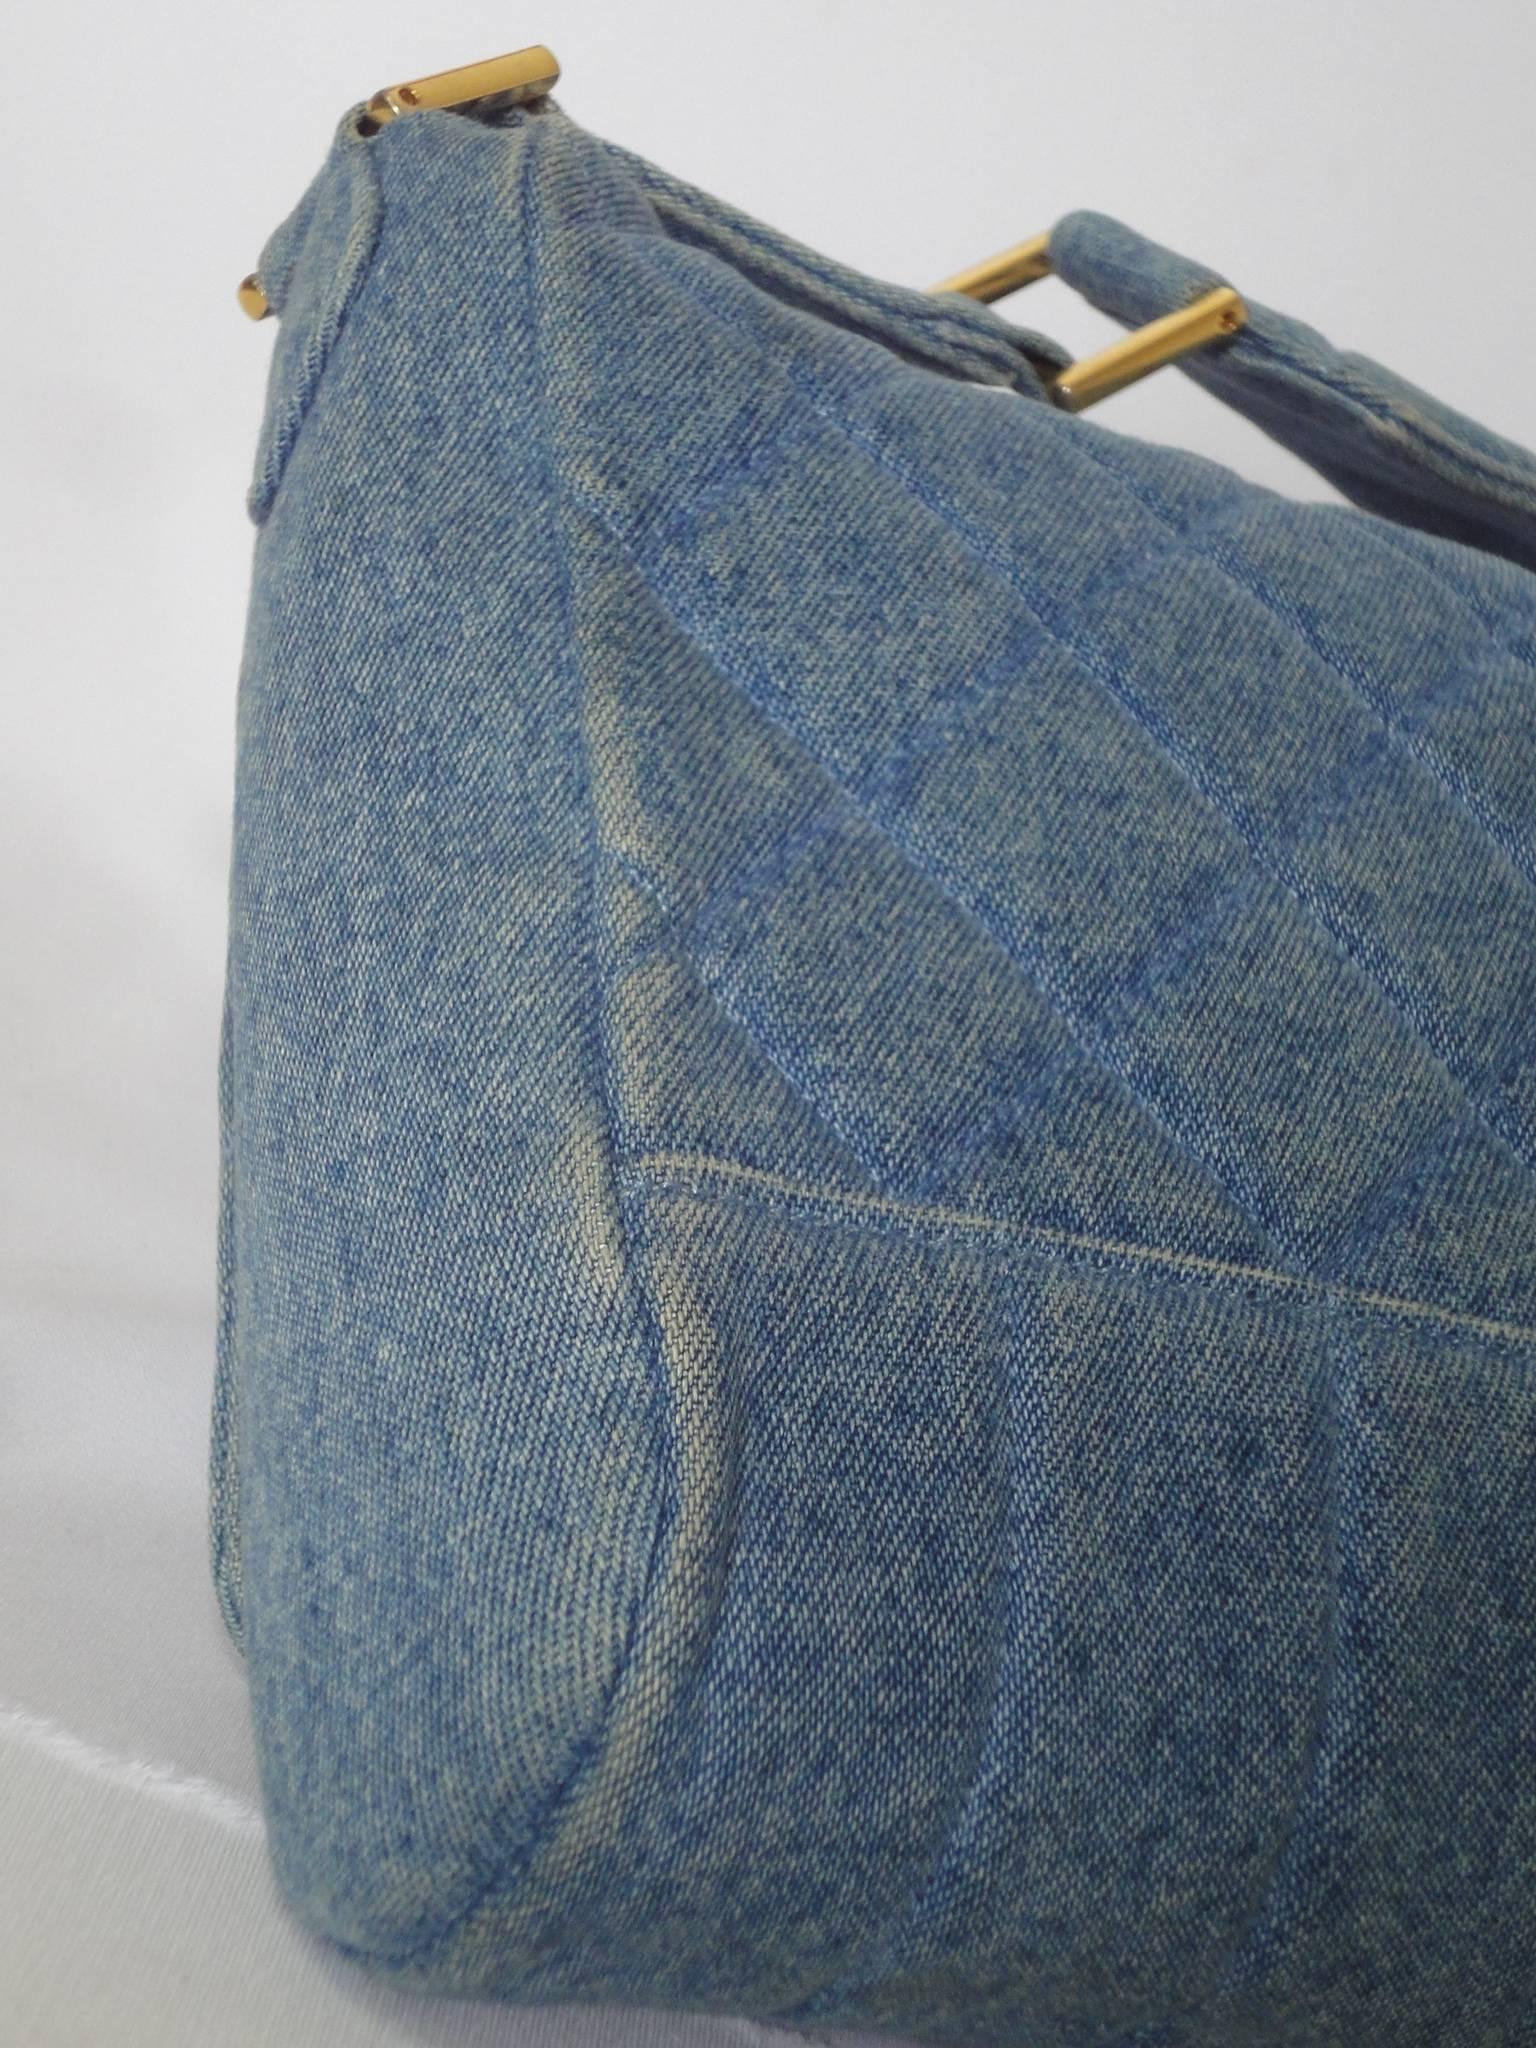 Vintage CHANEL denim bag with golden cc closure and vertical stitches.  1